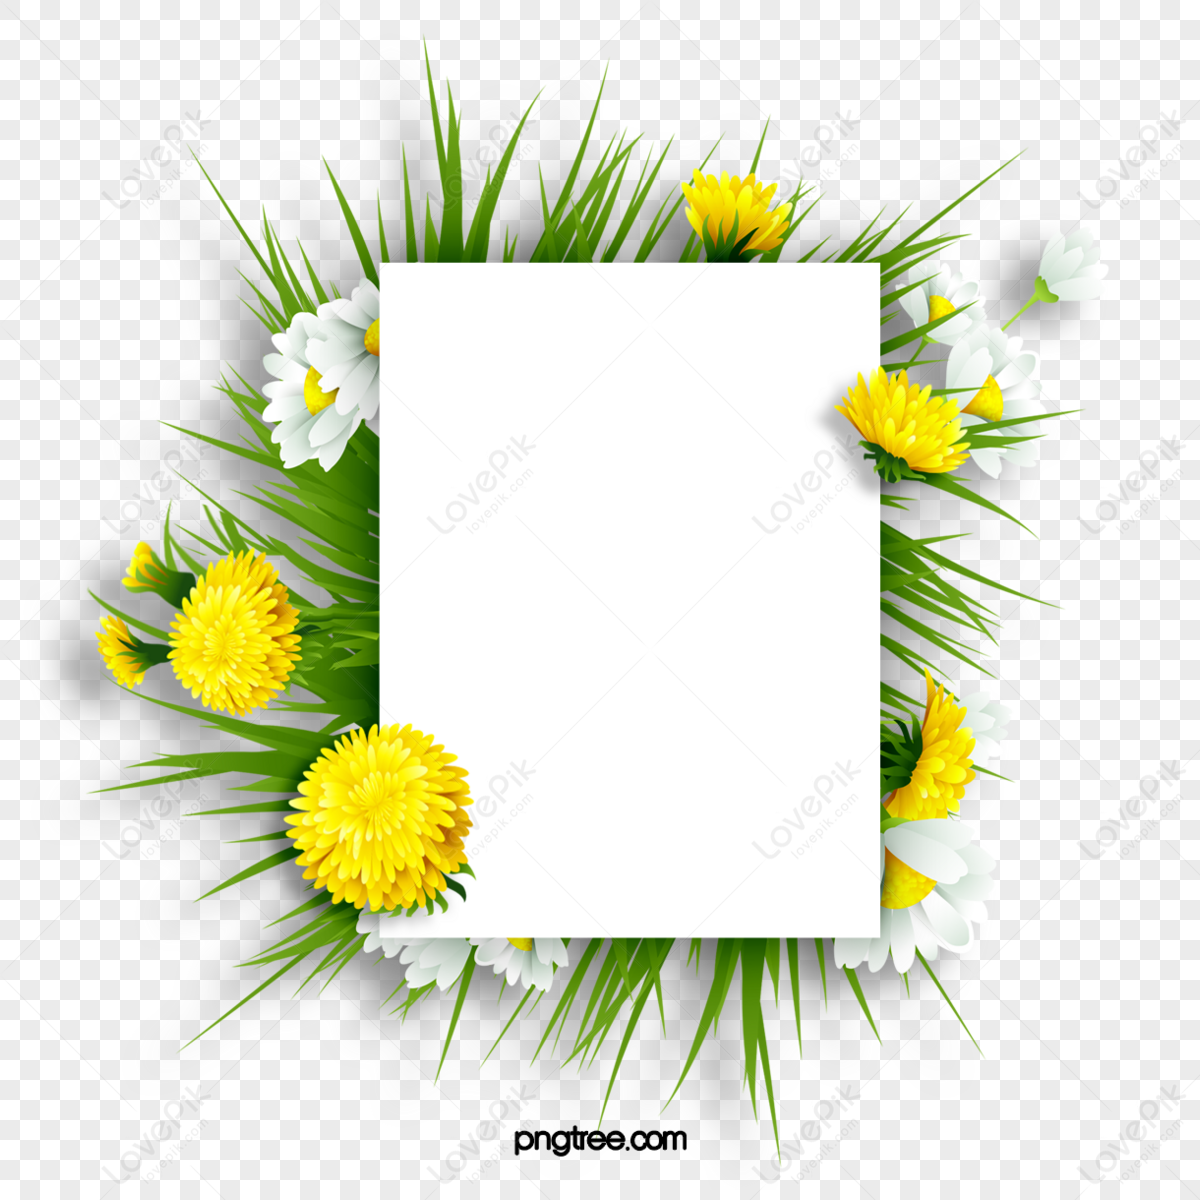 Daisies Border Png Images With